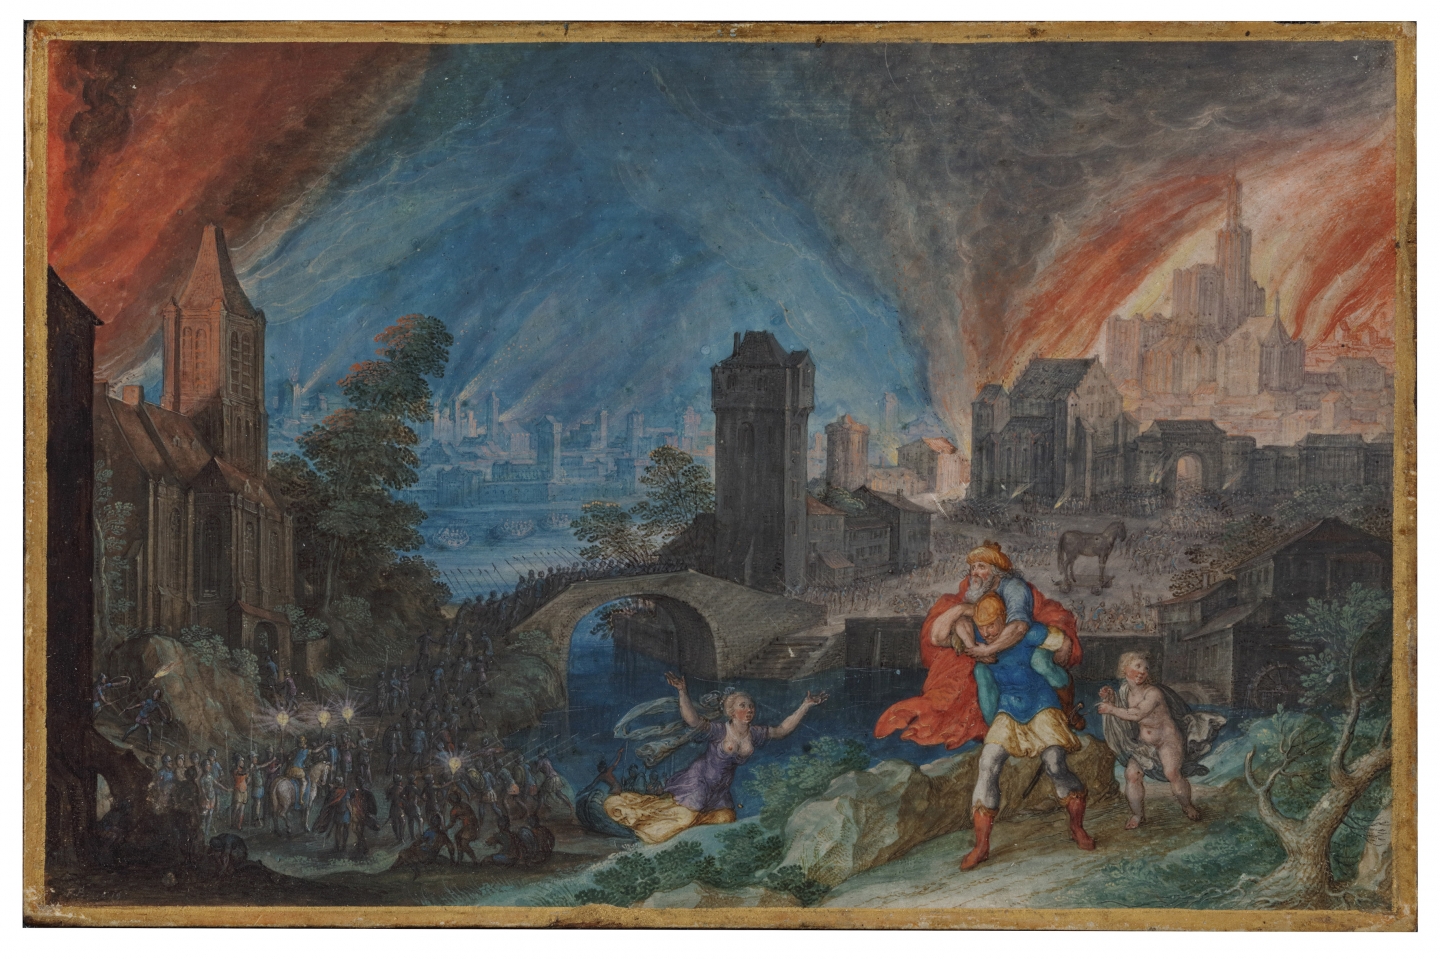 Friedrich Brentel (Lauingen 1580-1651 Strasbourg) Aeneas carying his blind father Anchises out of the burning city of Troy